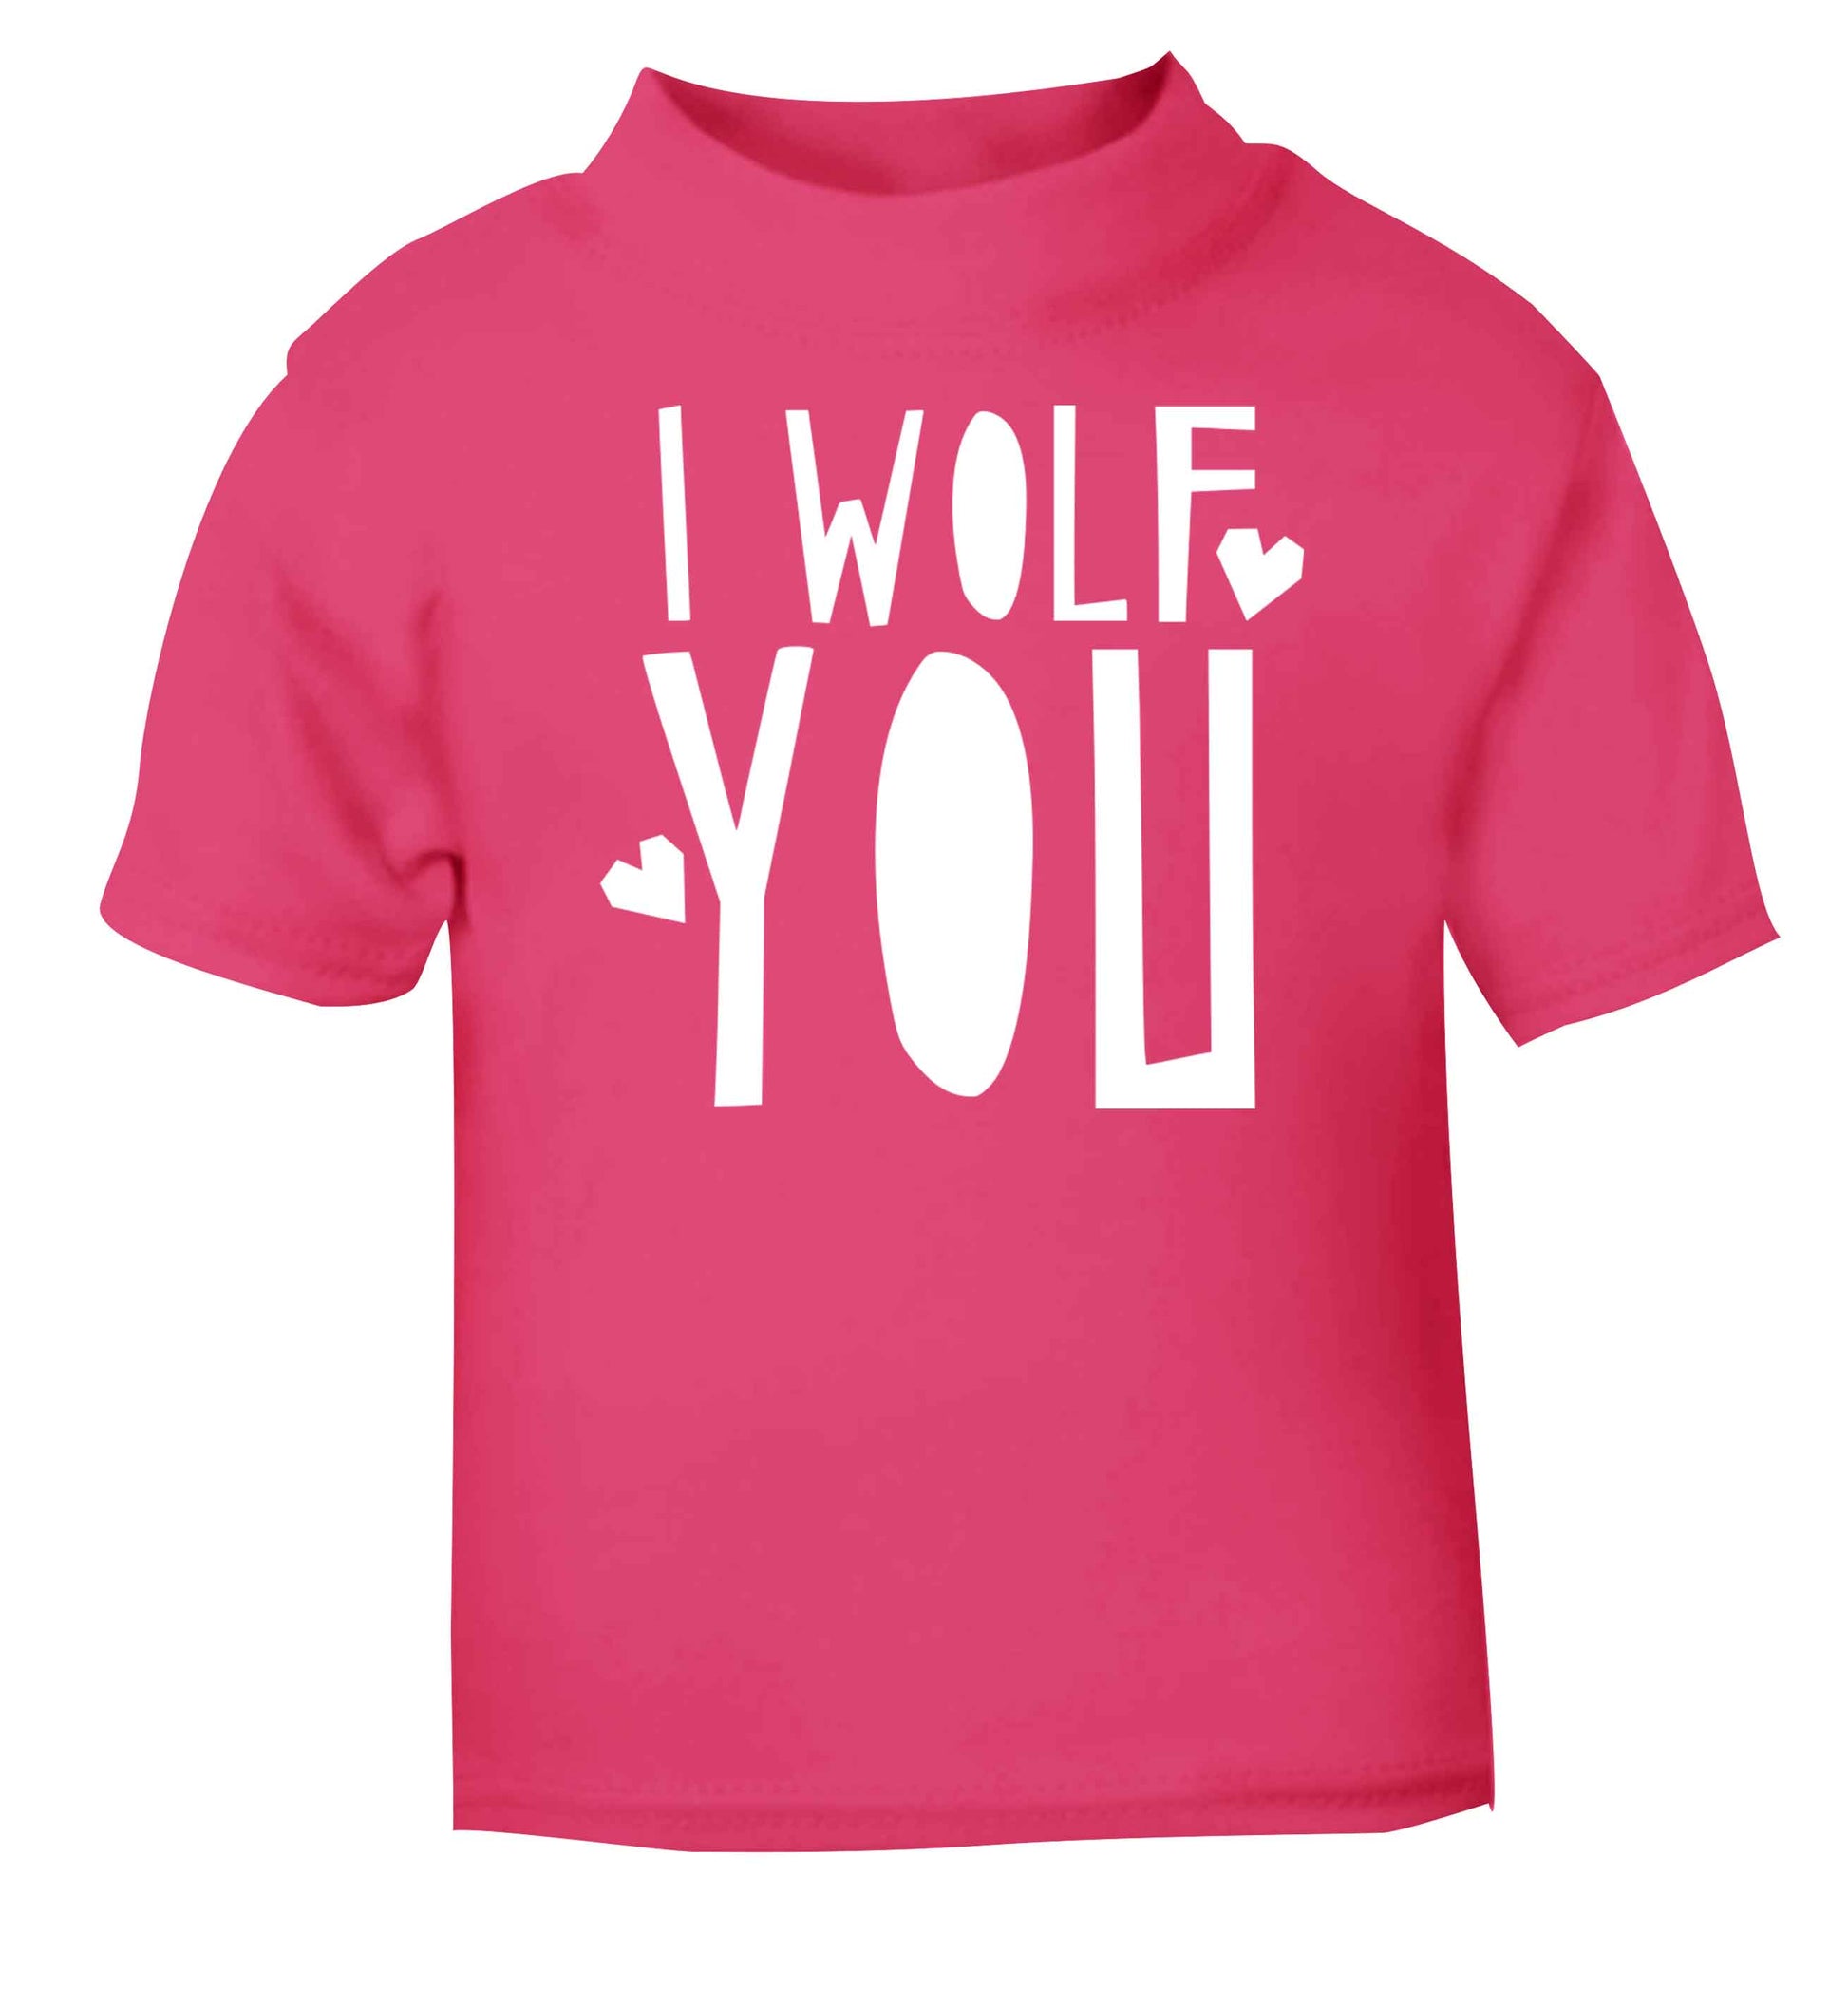 I wolf you pink baby toddler Tshirt 2 Years